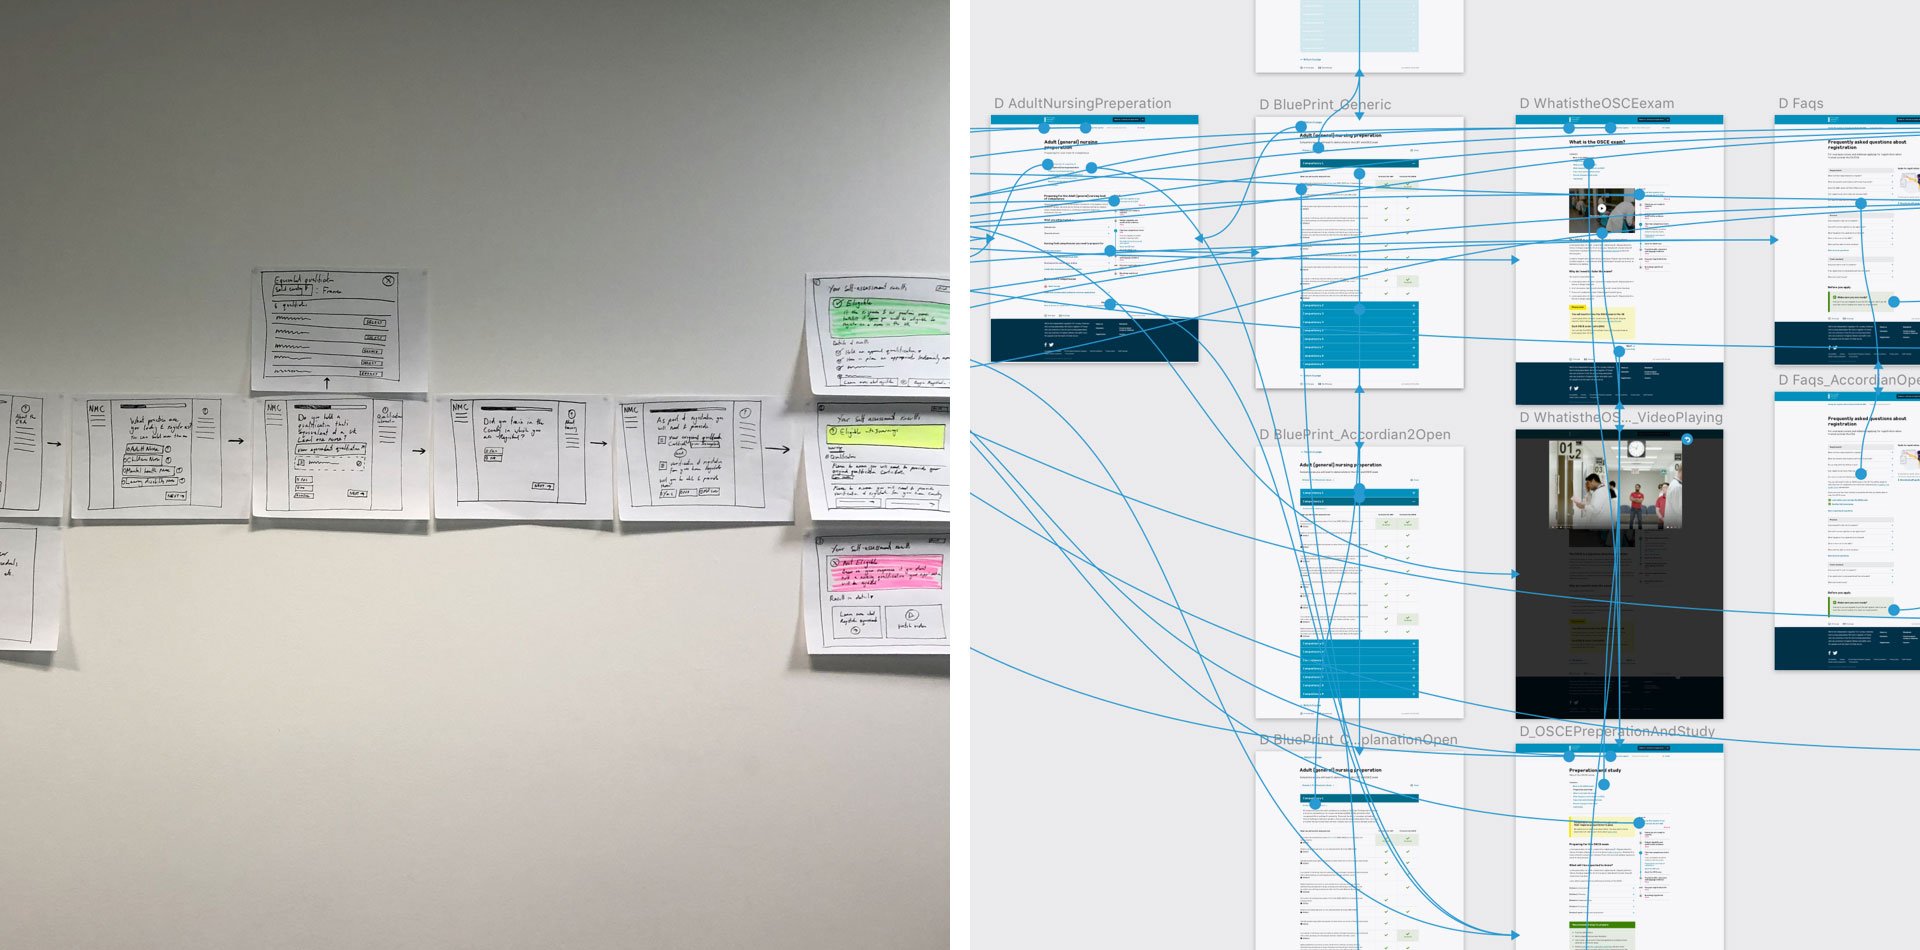 Prototyping user journeys allowed us to work quickly to iterate and test our design solutions